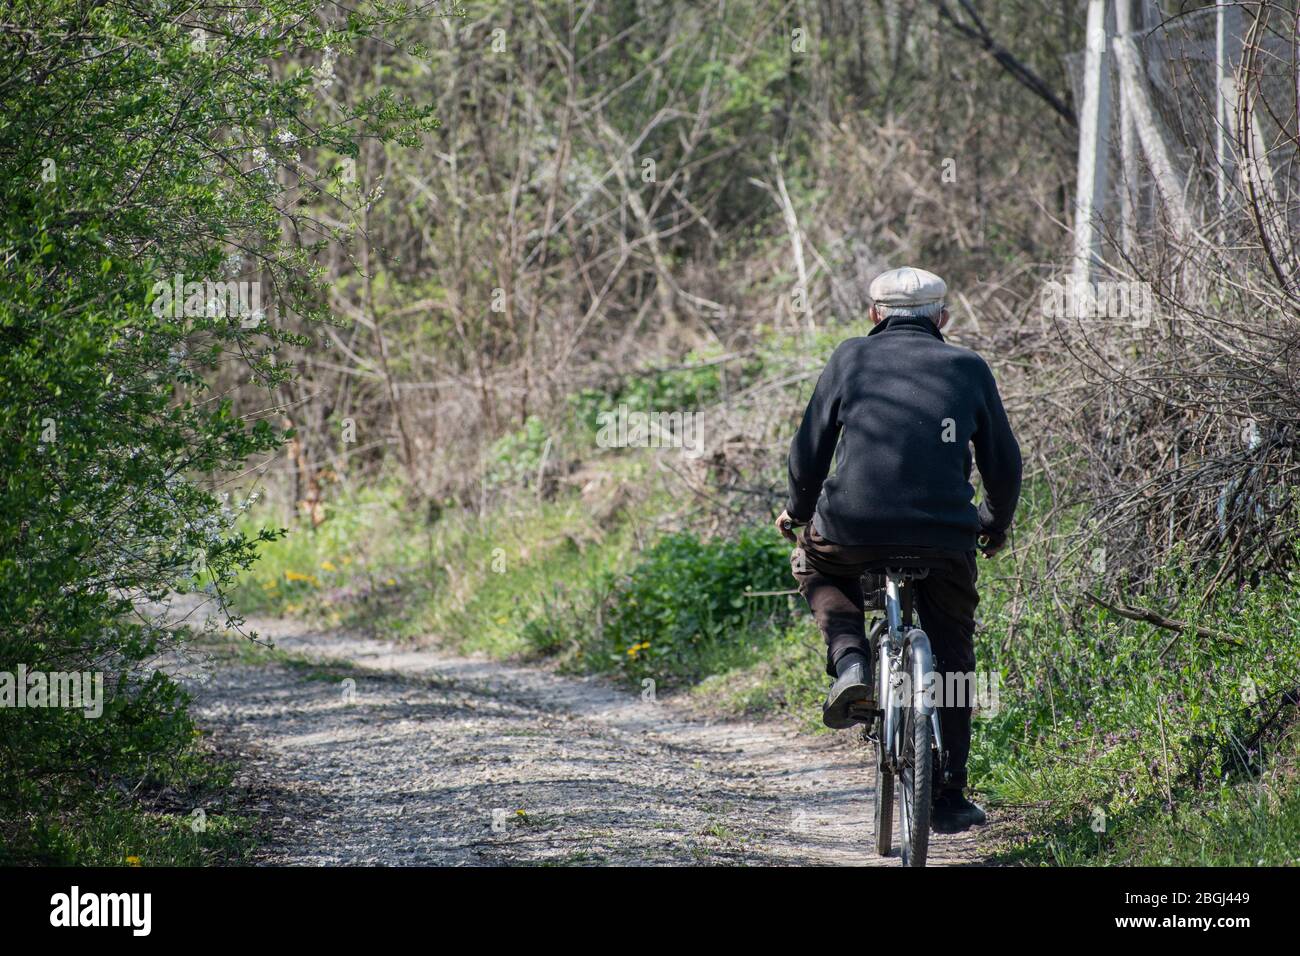 Elderly man riding a bike on field road in rural environment in Serbia, Europe Stock Photo